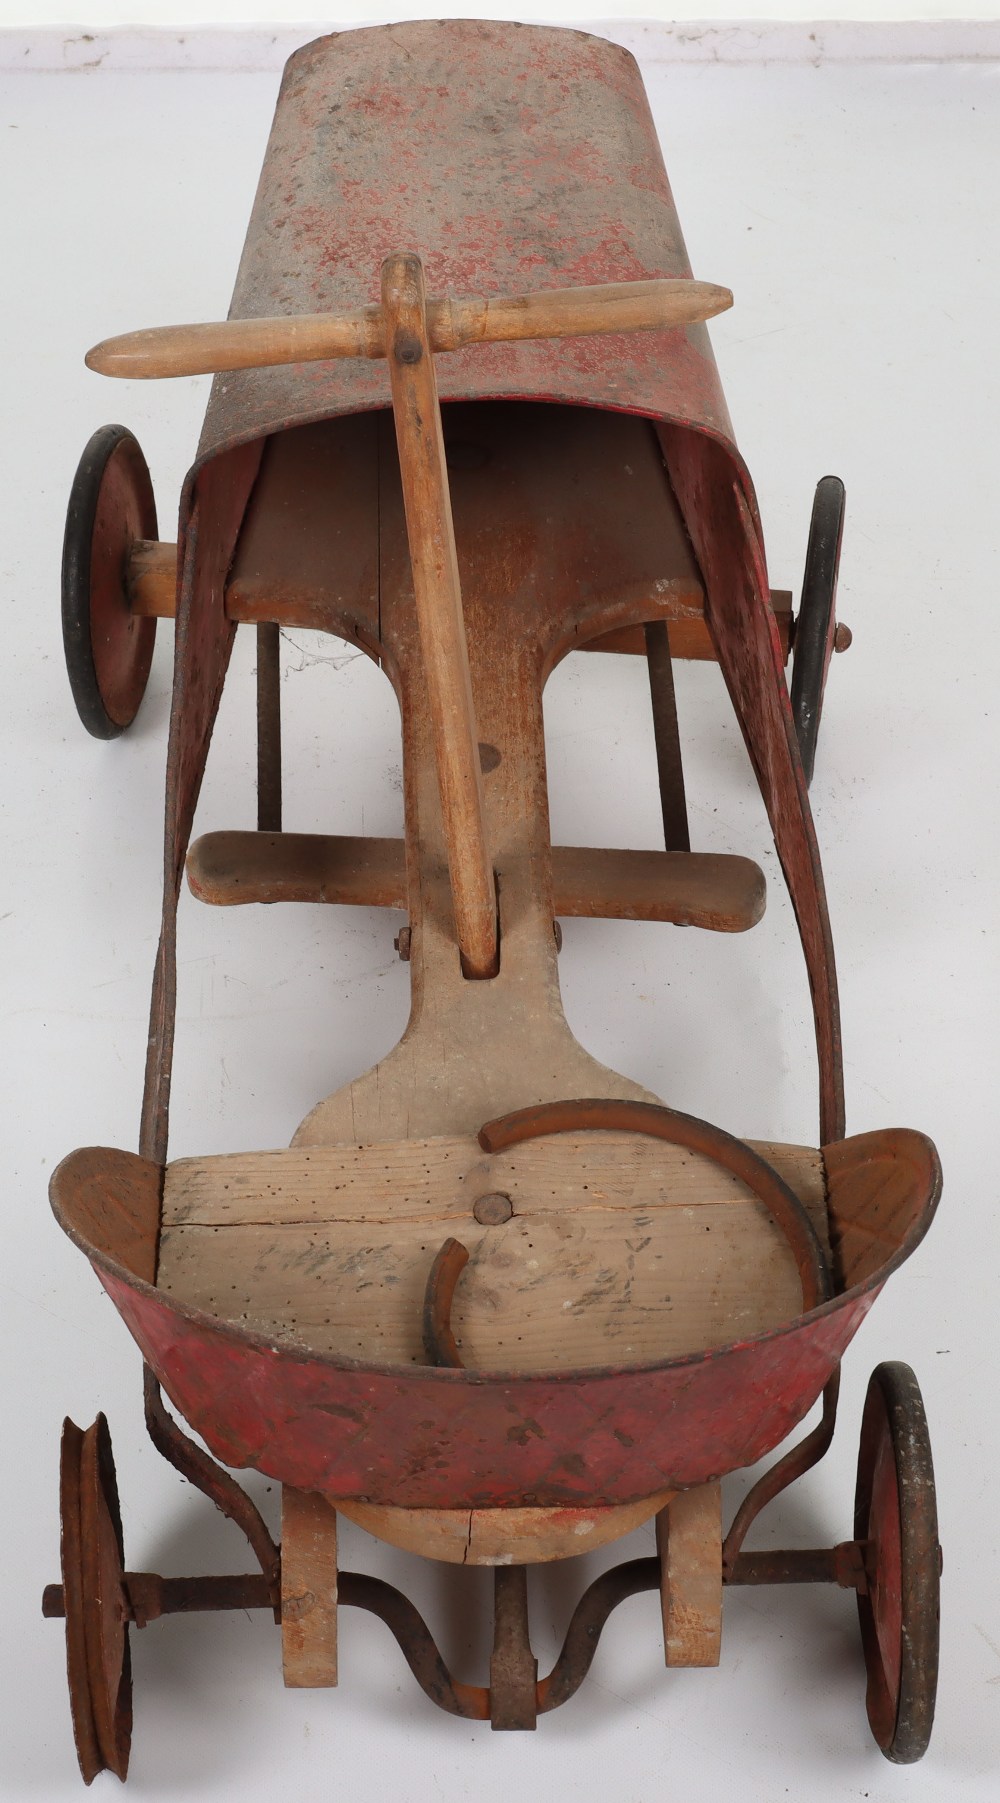 A pressed steel and wooden hand operated child’s car, French 1920s - Image 6 of 7